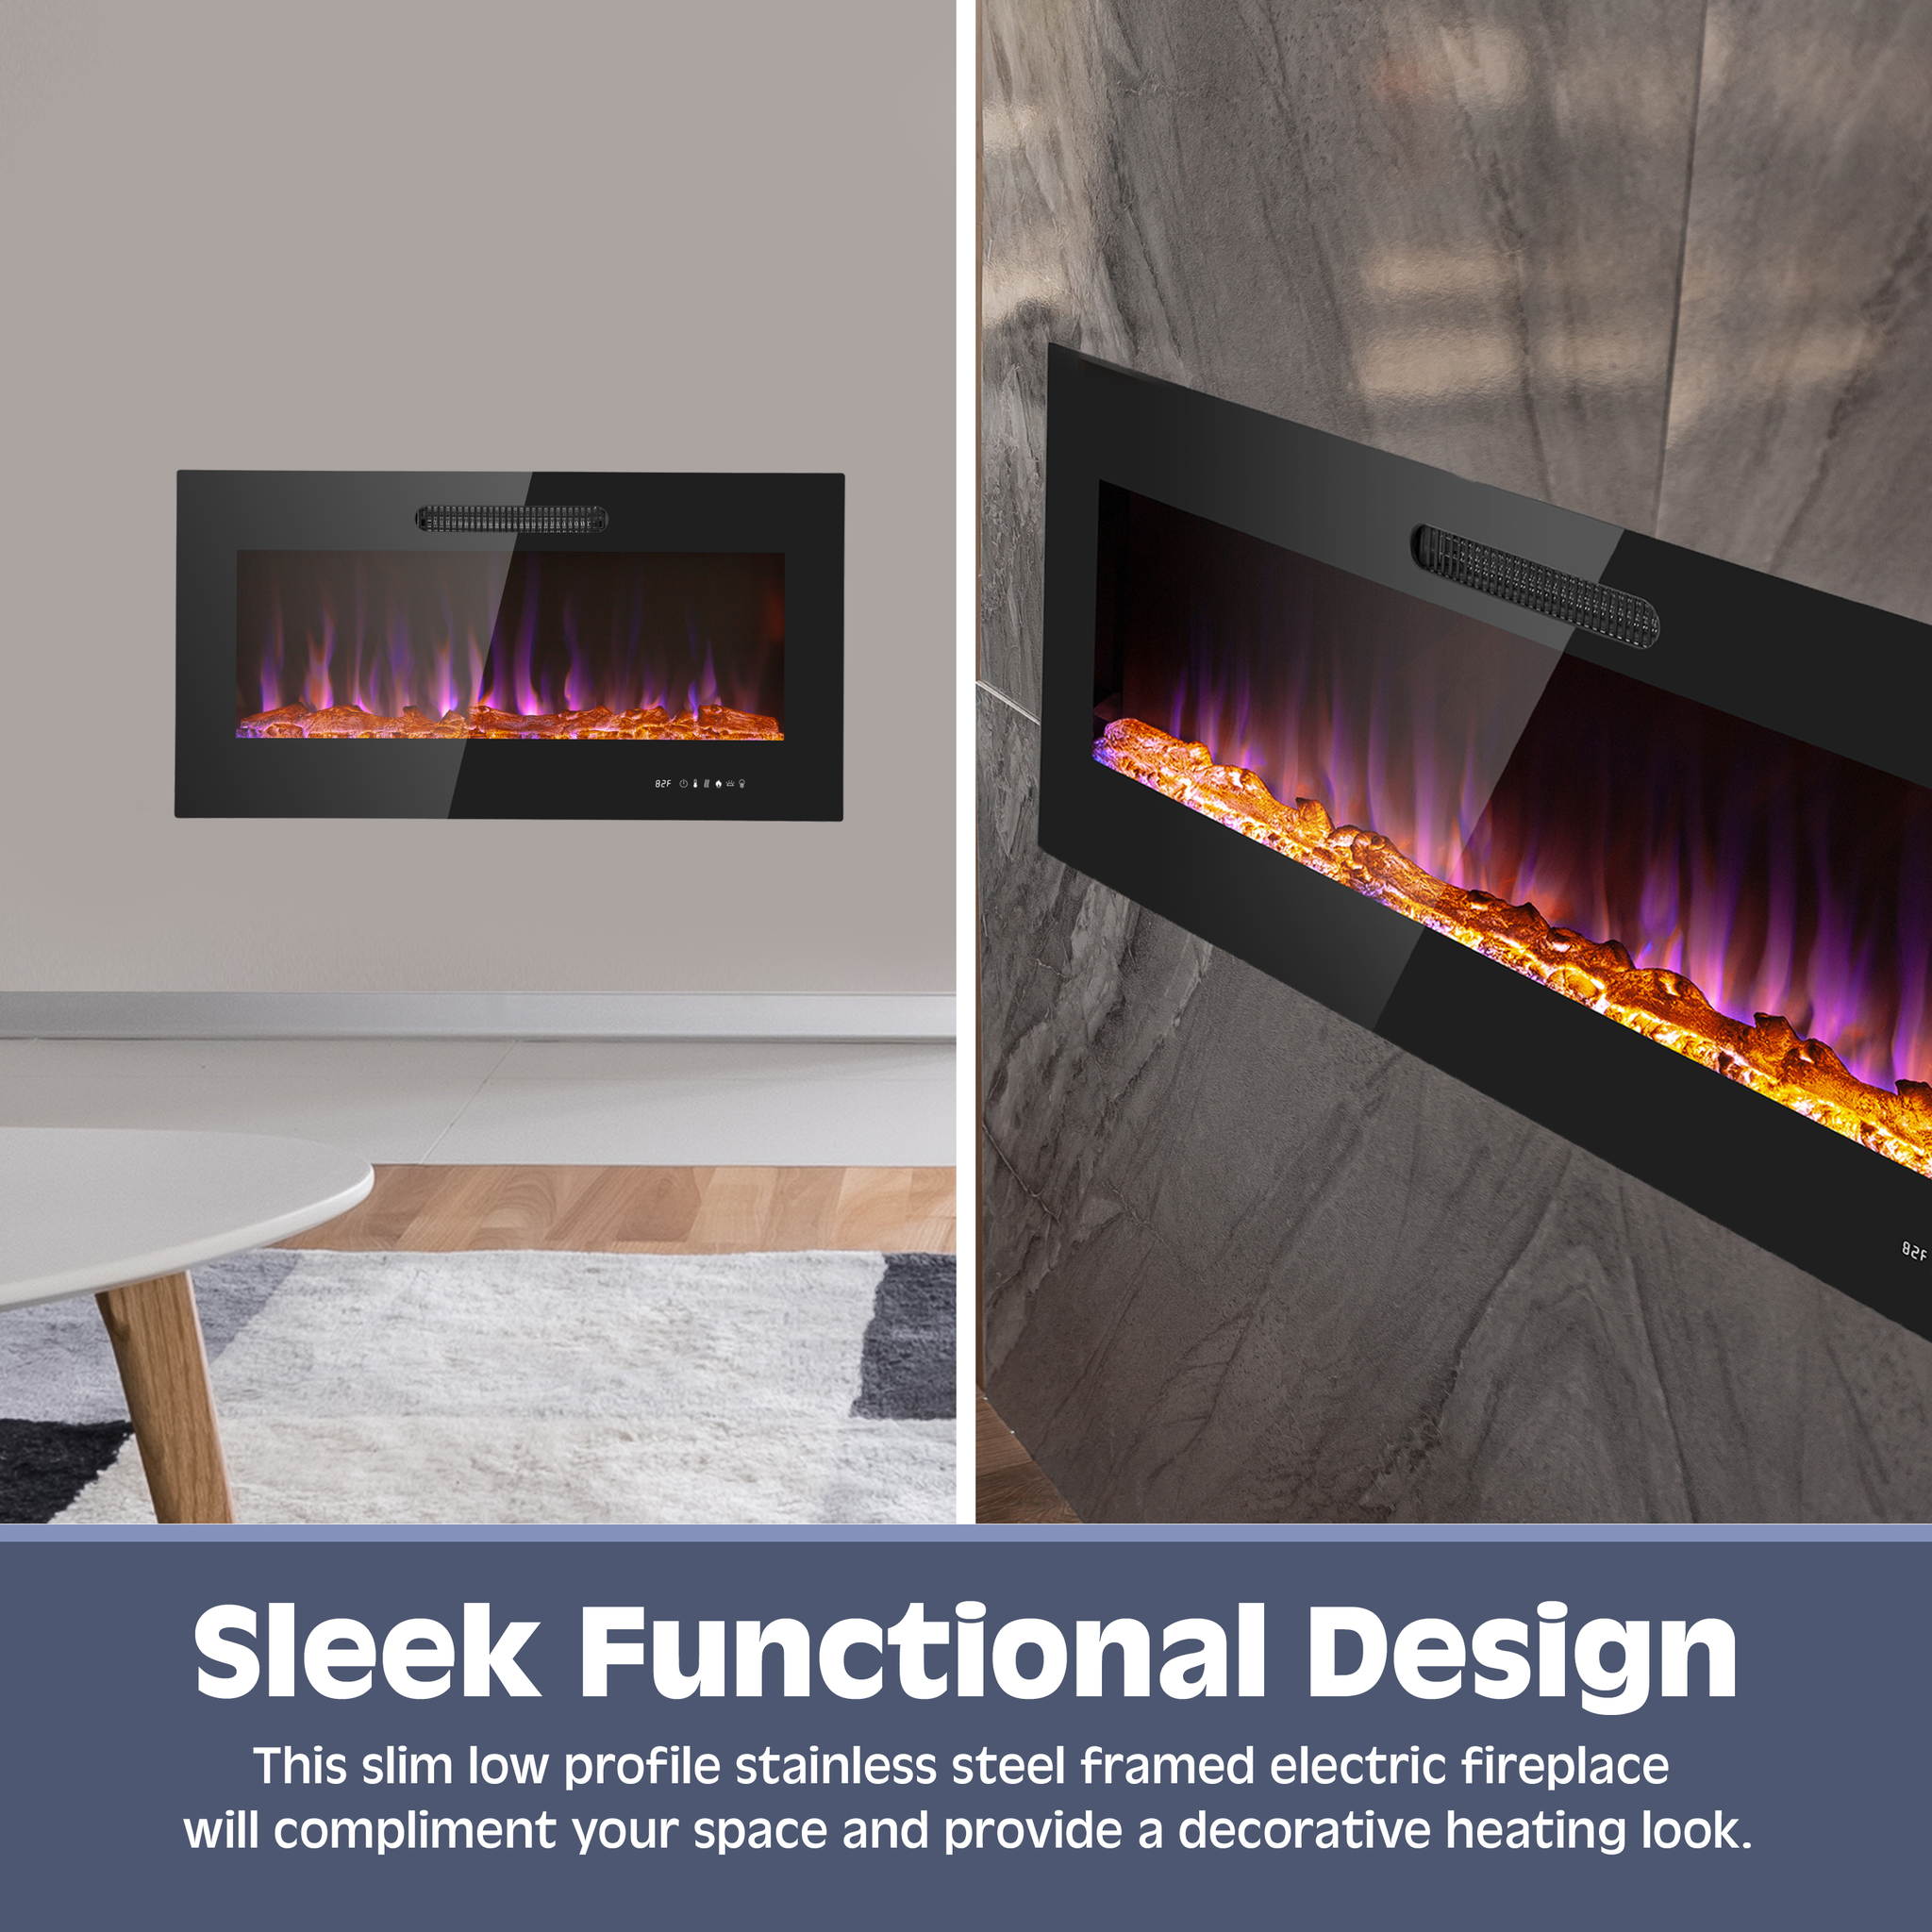 50 Inch LED Slim Design Electric Fireplace Insert and Wall Mounted Fireplace with 1500 Watt Heater, Log & Crystal Ember Options, Adjustable Realistic Flame and Remote Control by Prominence Home